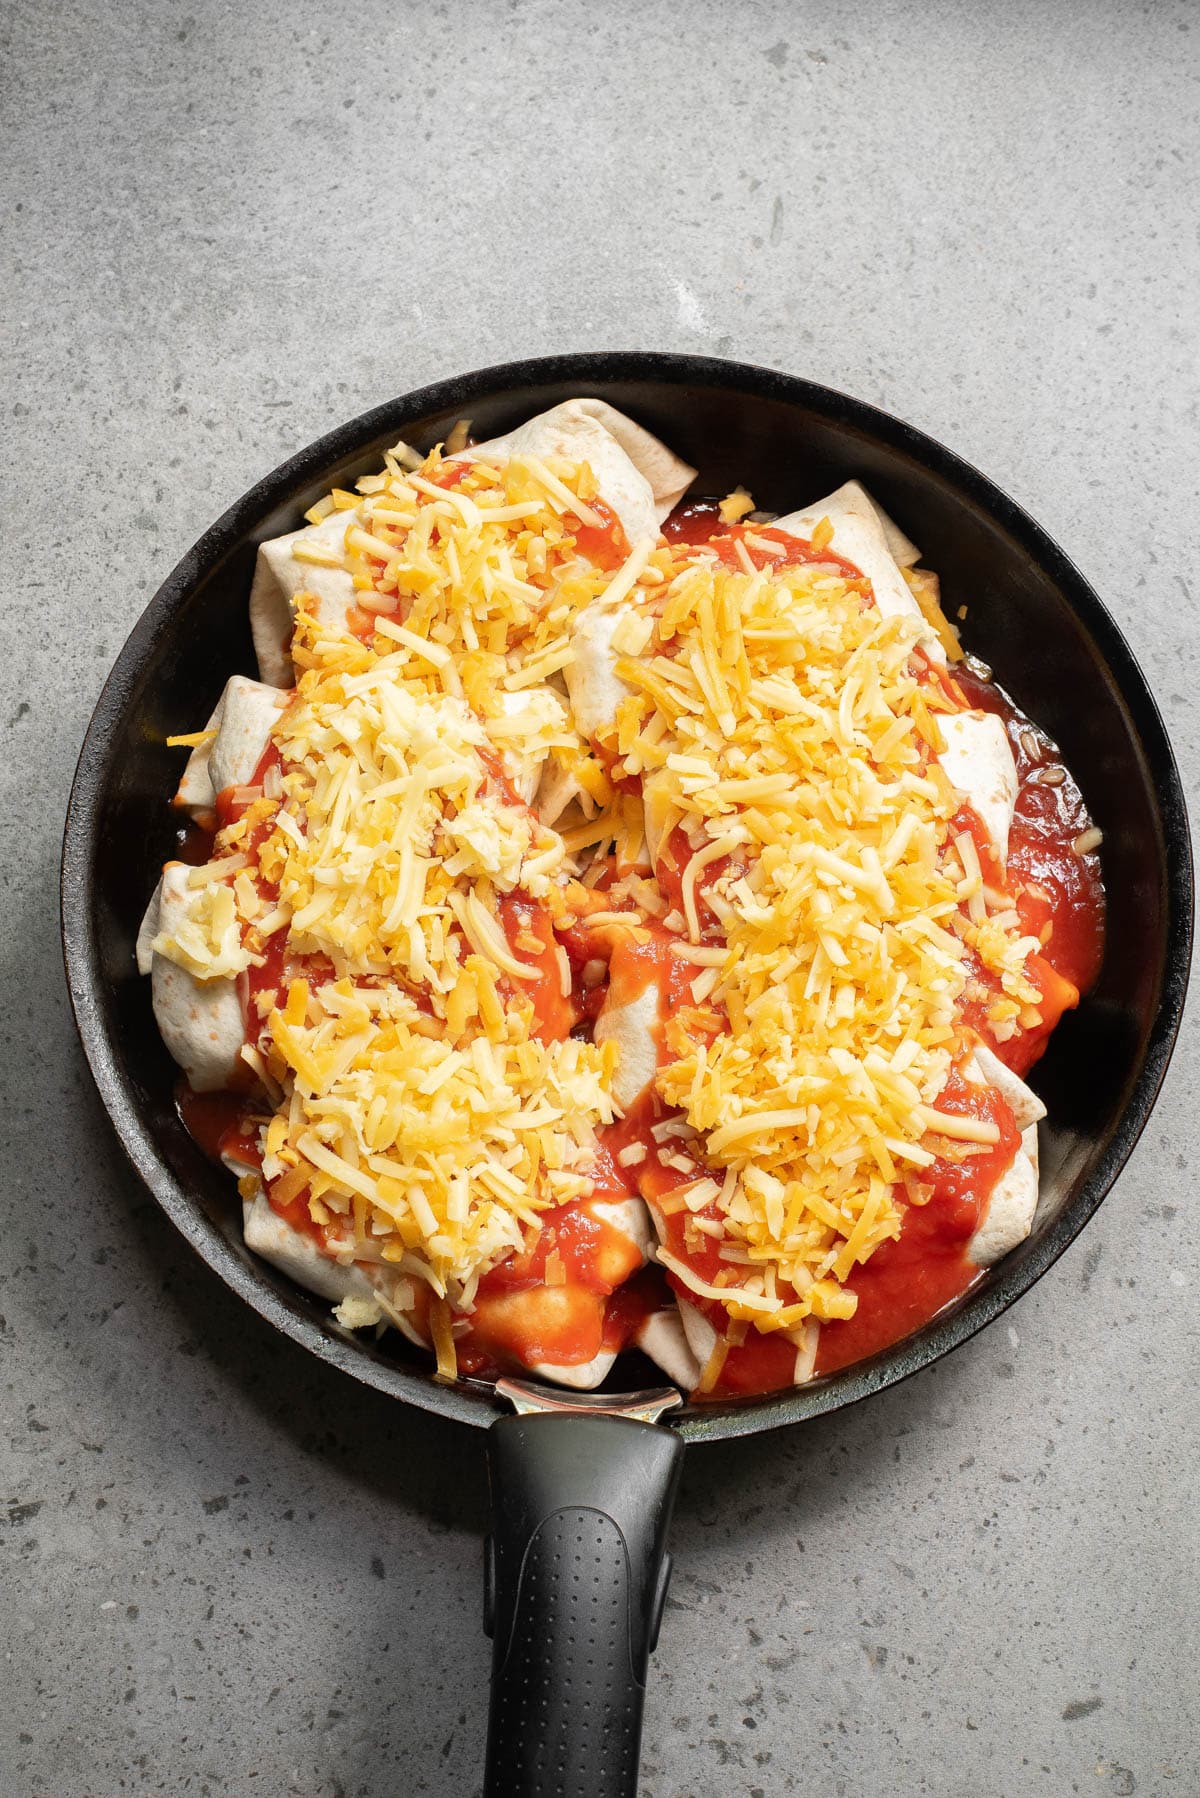 Tortillas folded and covered in sauce and cheese in a cast iron skillet.